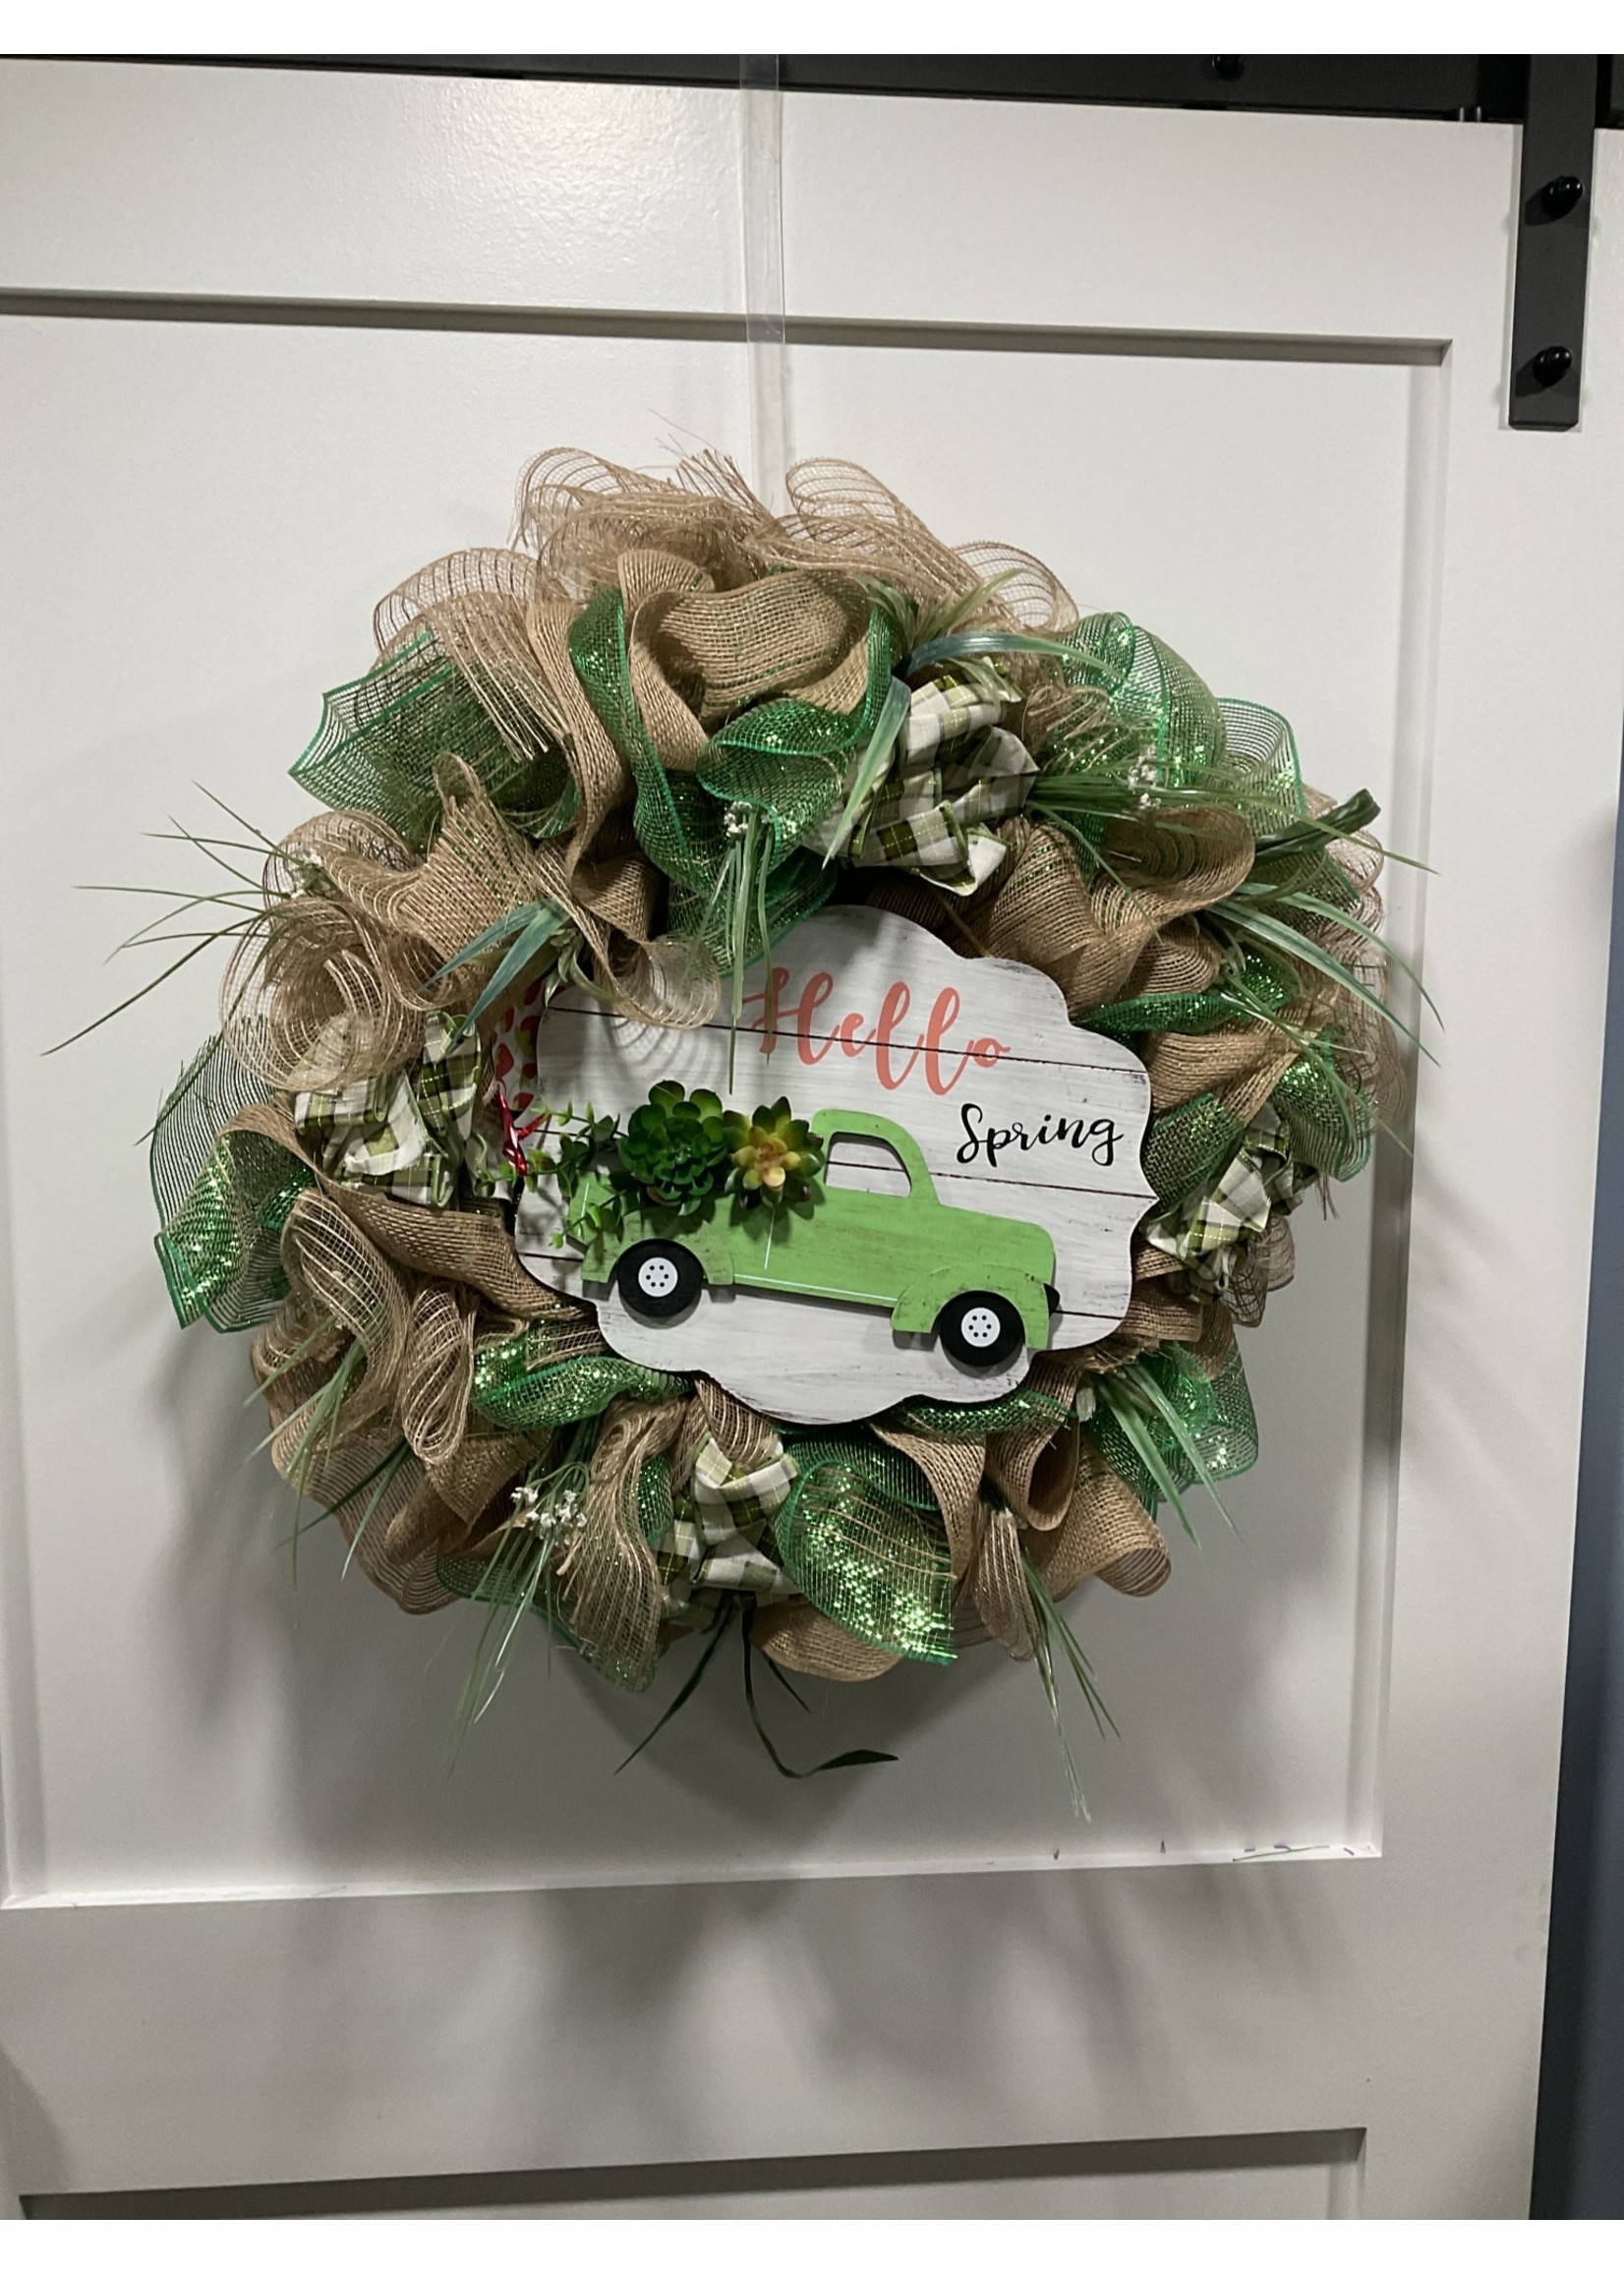 My New Favorite Thing Wreath Mesh 24 in-Green and Tan "Hello Spring" w/Green Truck and Green Plaid Ribbon